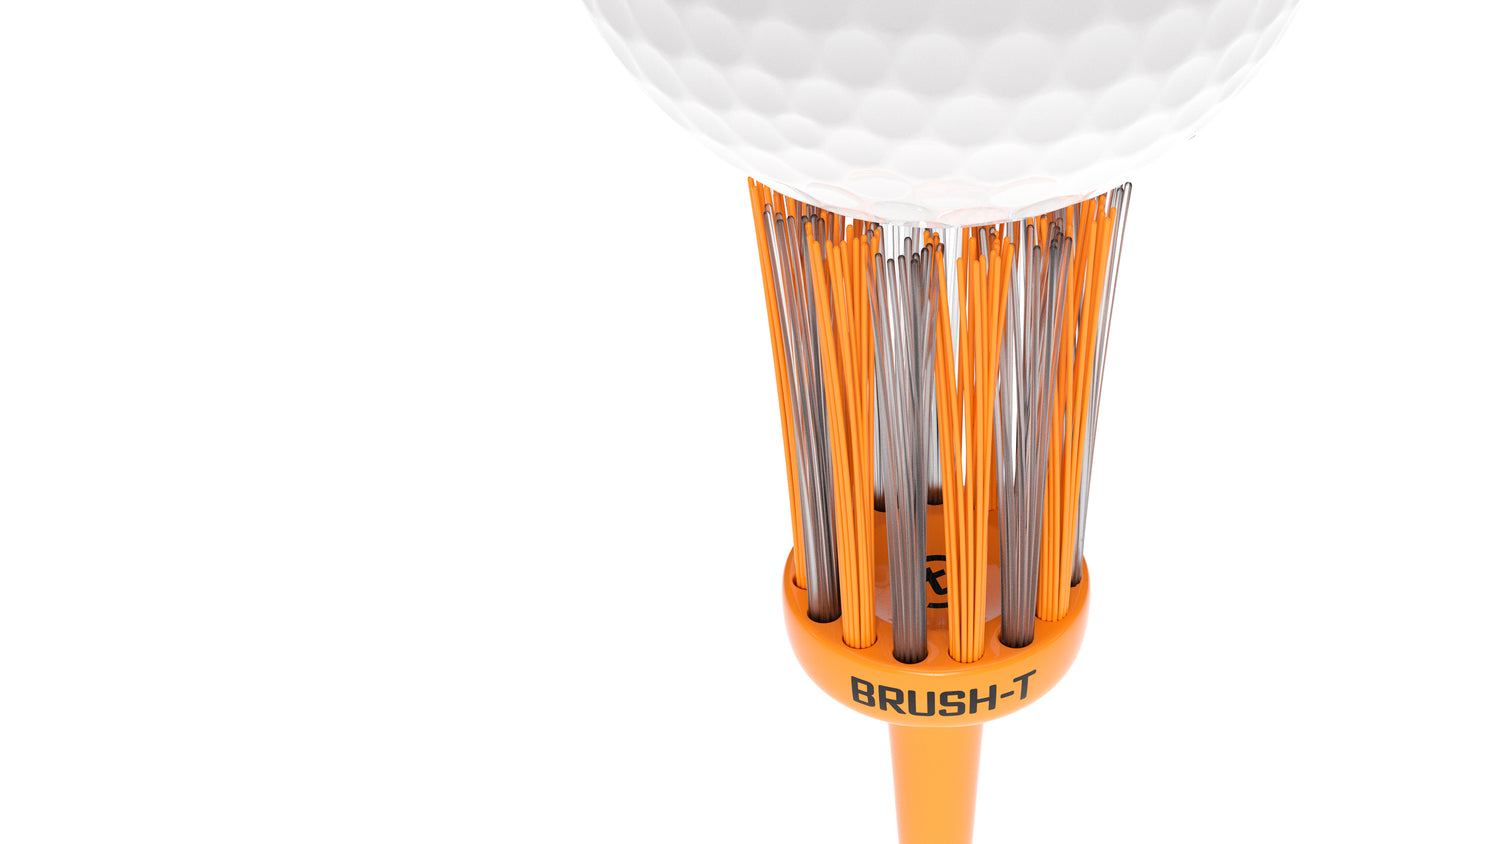 hero image for brush-t performance golf tee. innovative plastic brush tees with flexible bristles for reduced friction and consistent tee height. perfect golf accessories for golfers.